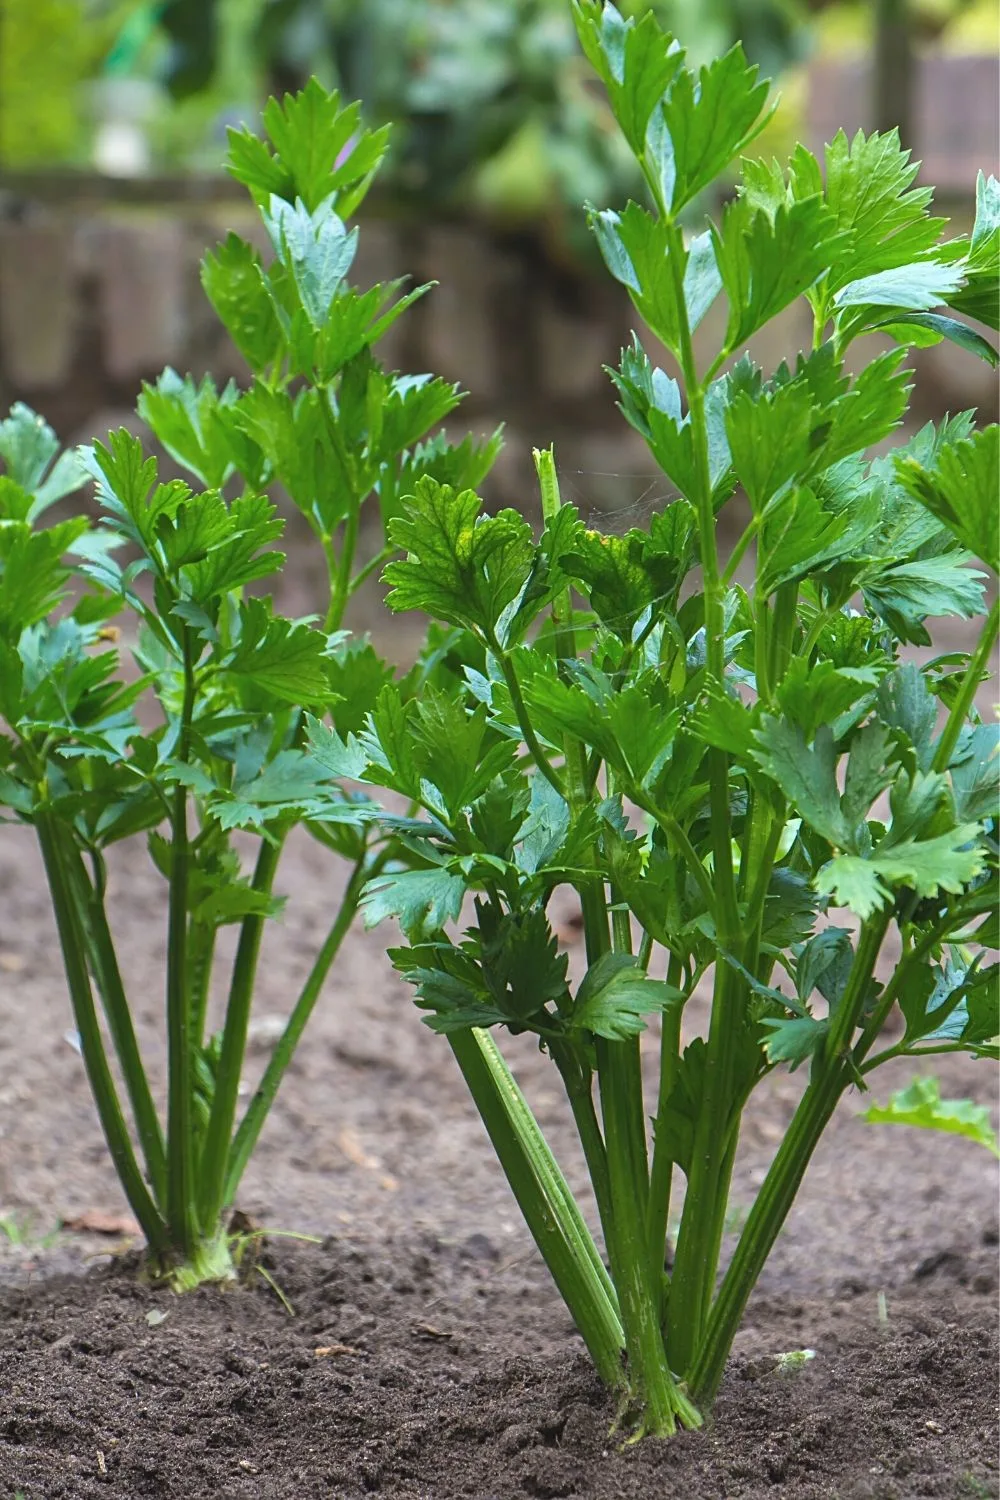 Though Celery is a time-consuming plant, it grows well in a raised bed garden